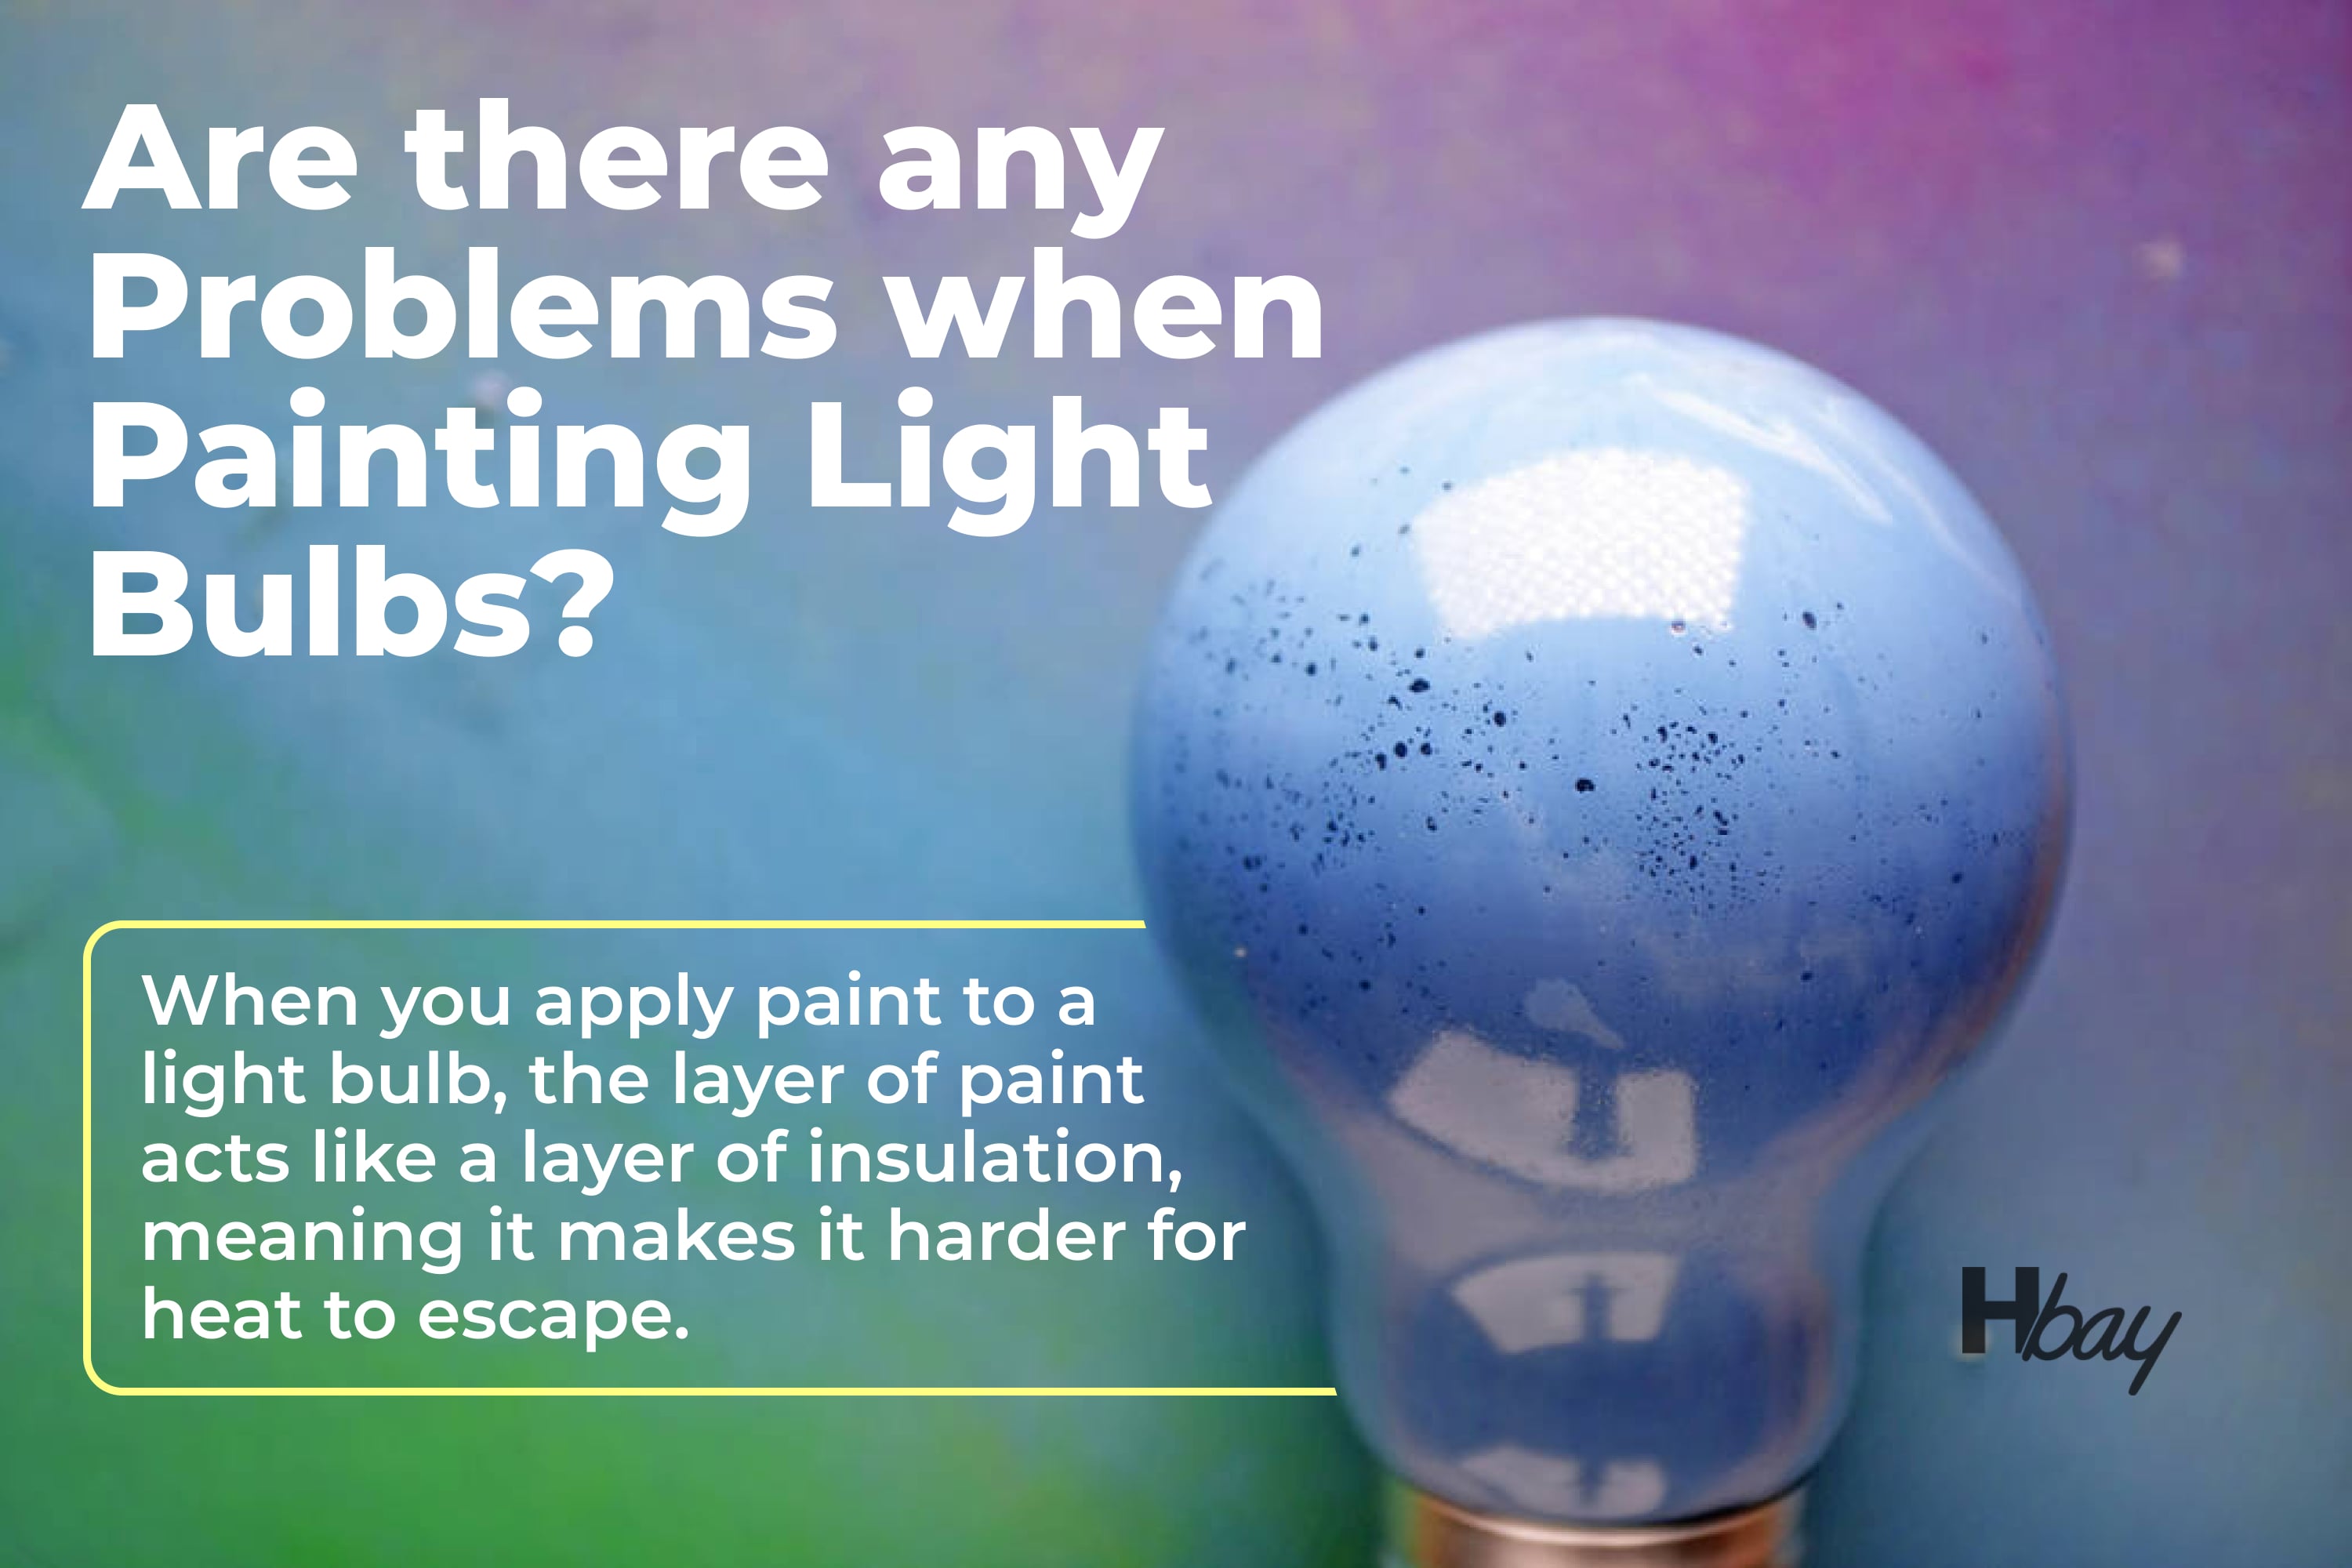 Are there any problems when painting light bulbs